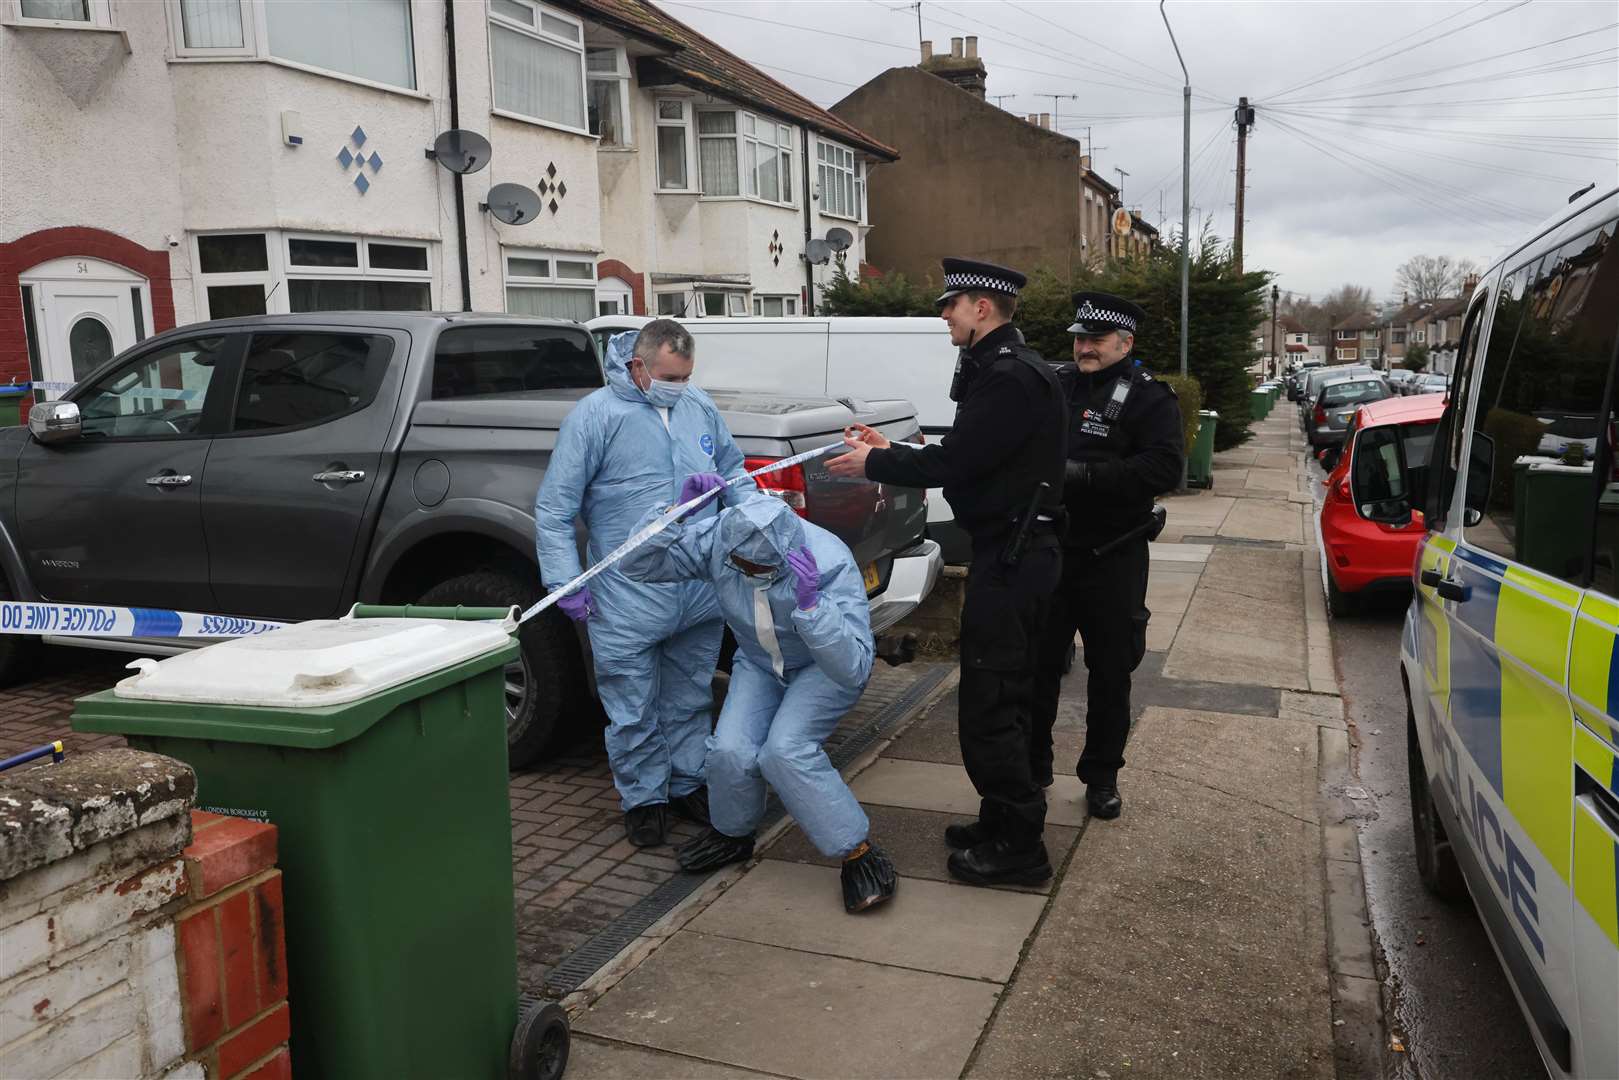 Police remain at the scene after a woman and two boys were found dead inside on Thursday. Picture: UKNIP